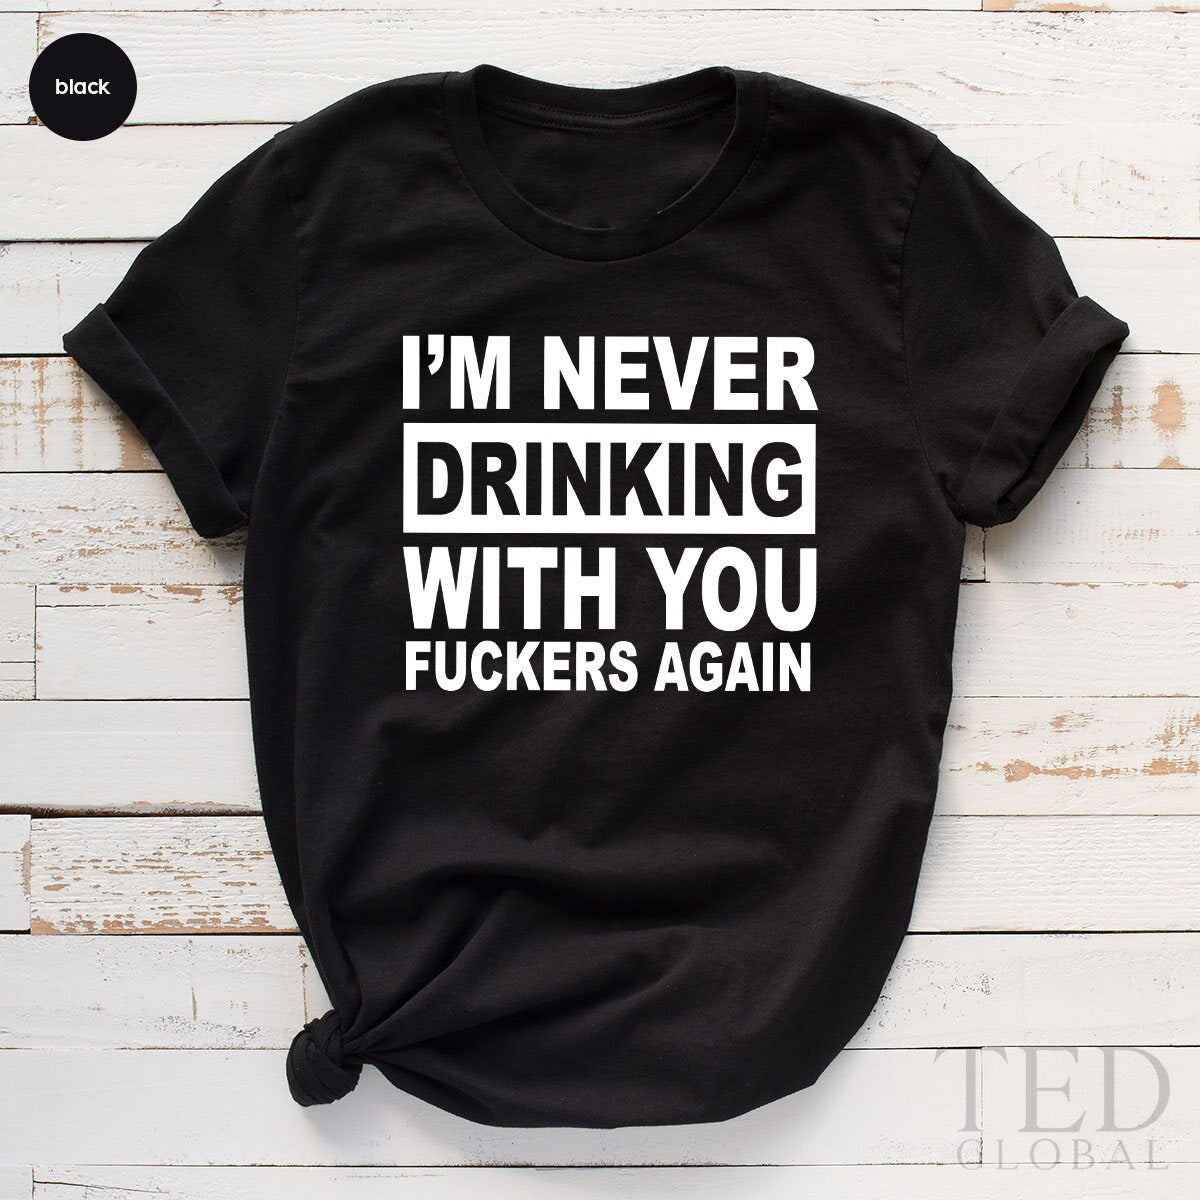 Funny Drinking TShirt, Drinker T Shirt, Drinking Buddies Gift, Drunk Humor Shirt, Best Friends, Never Drinking With You Fucker, Humorous Tee - Fastdeliverytees.com